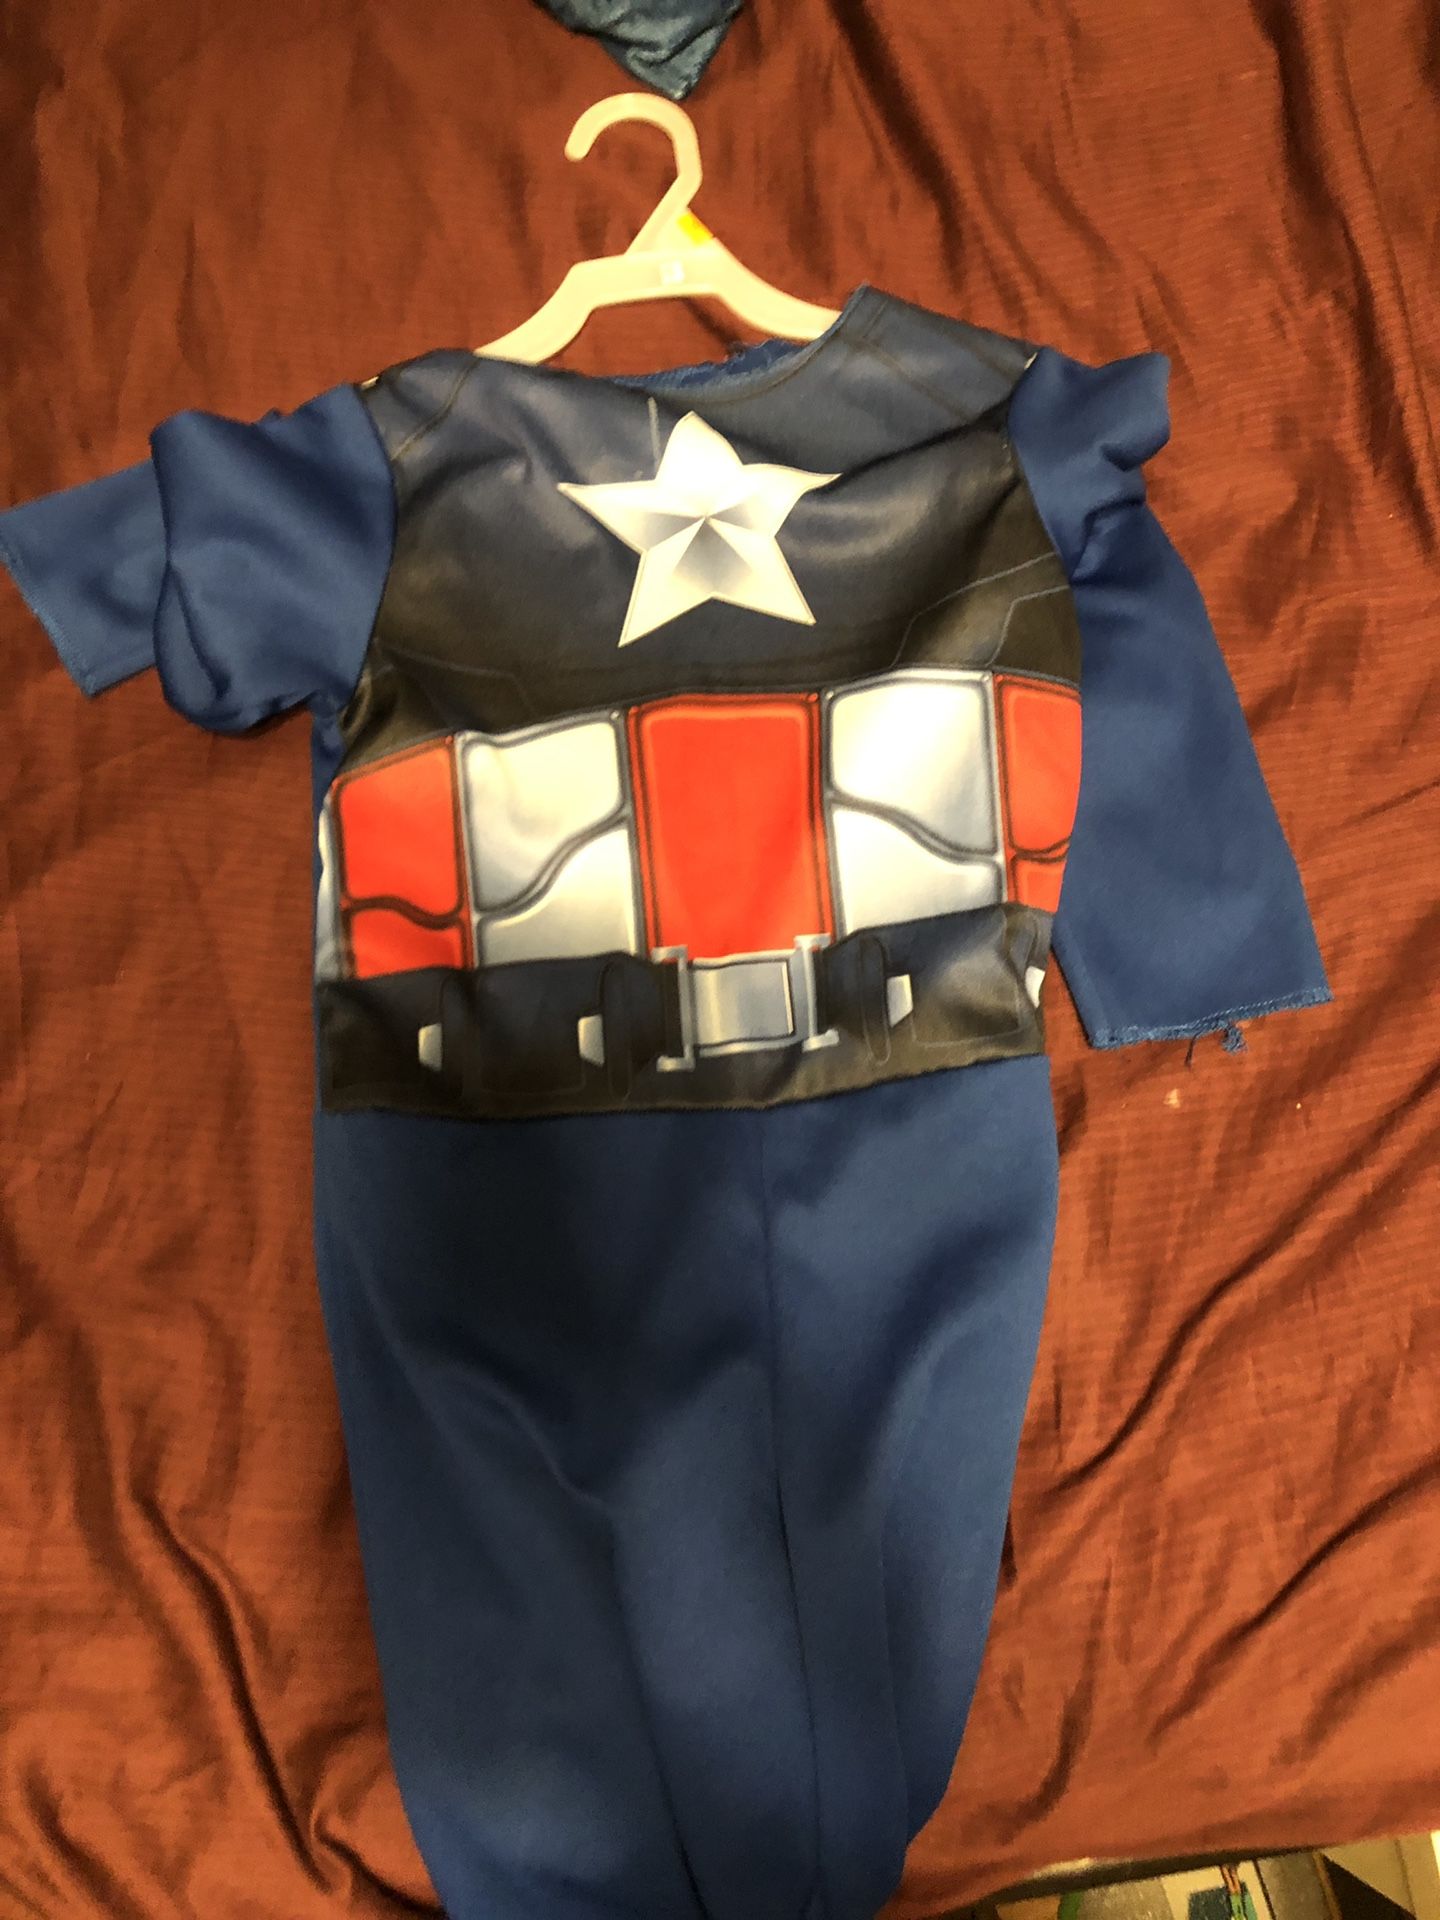 Captain American Halloween outfit onesie